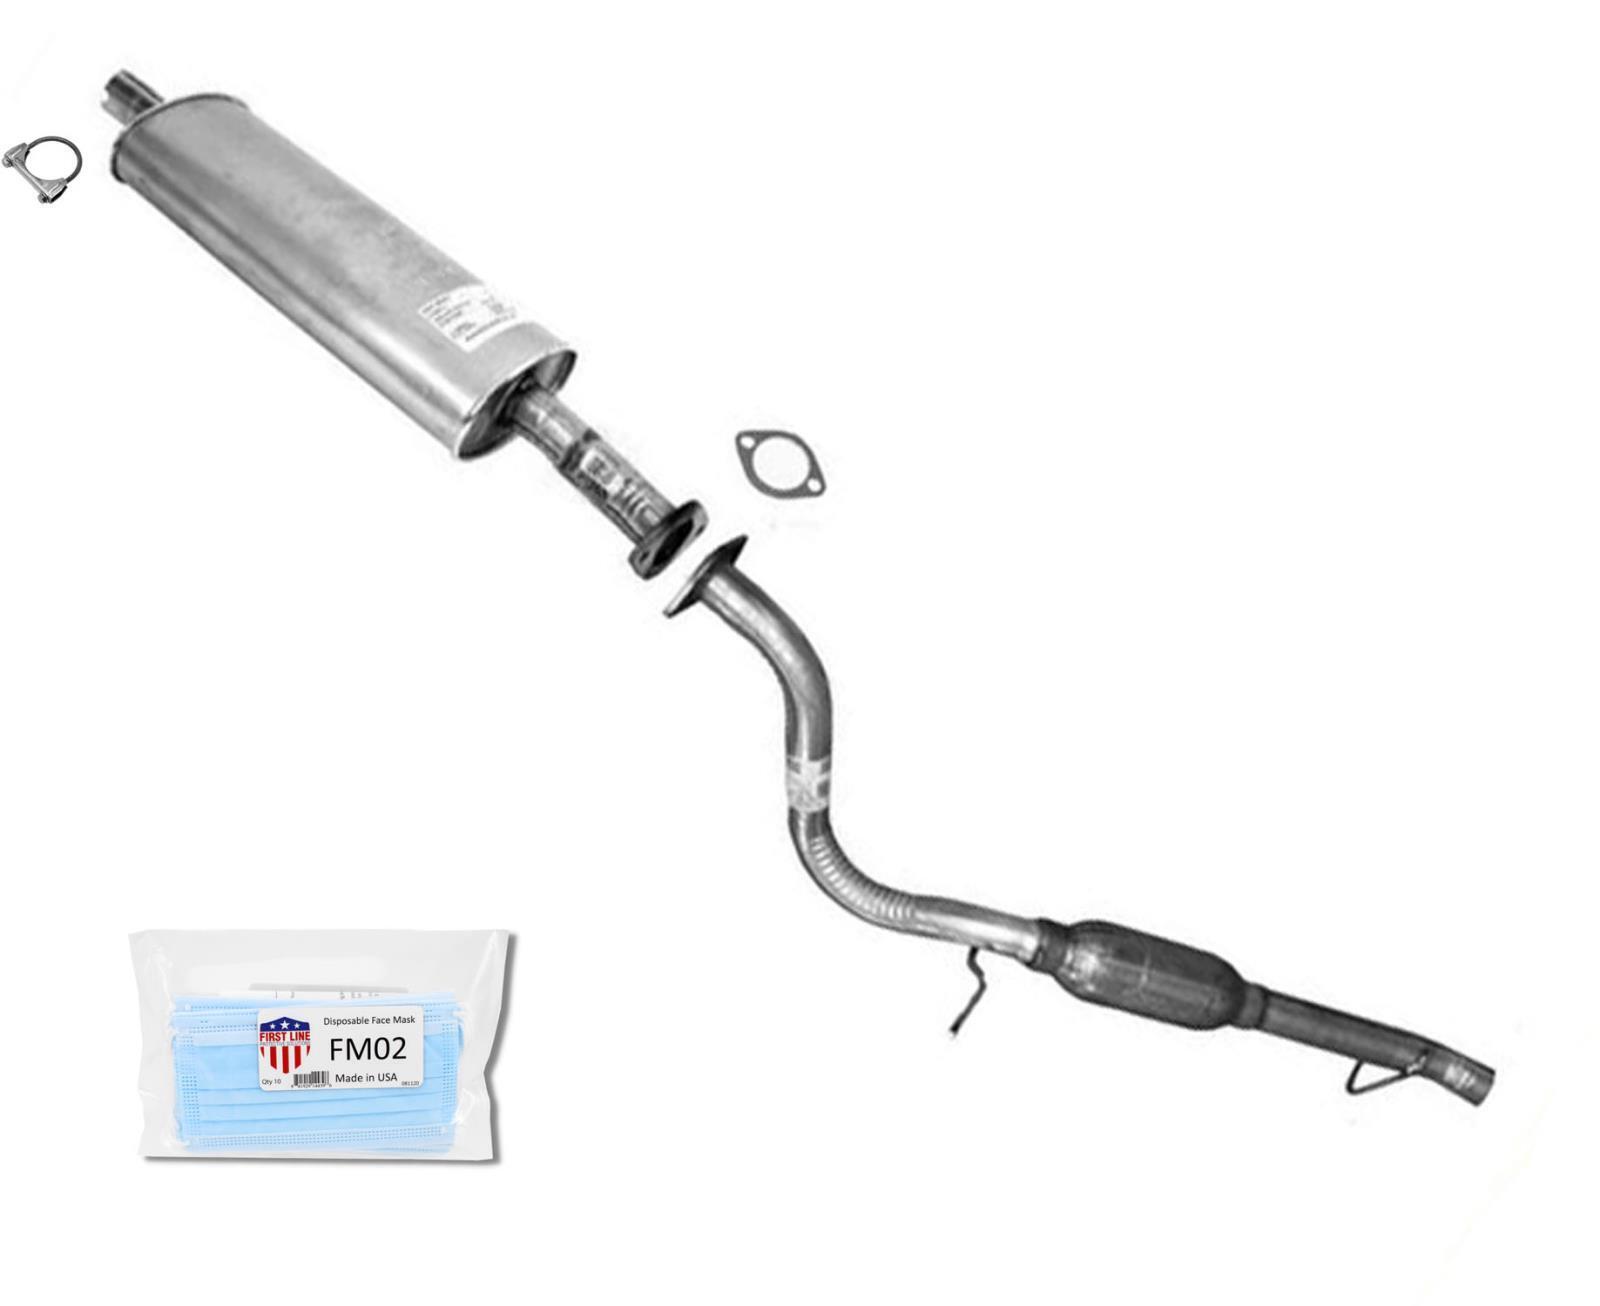 Muffler Resonator Exhaust System Fits Ford Escape 2.0L 3.0L 2001-2004